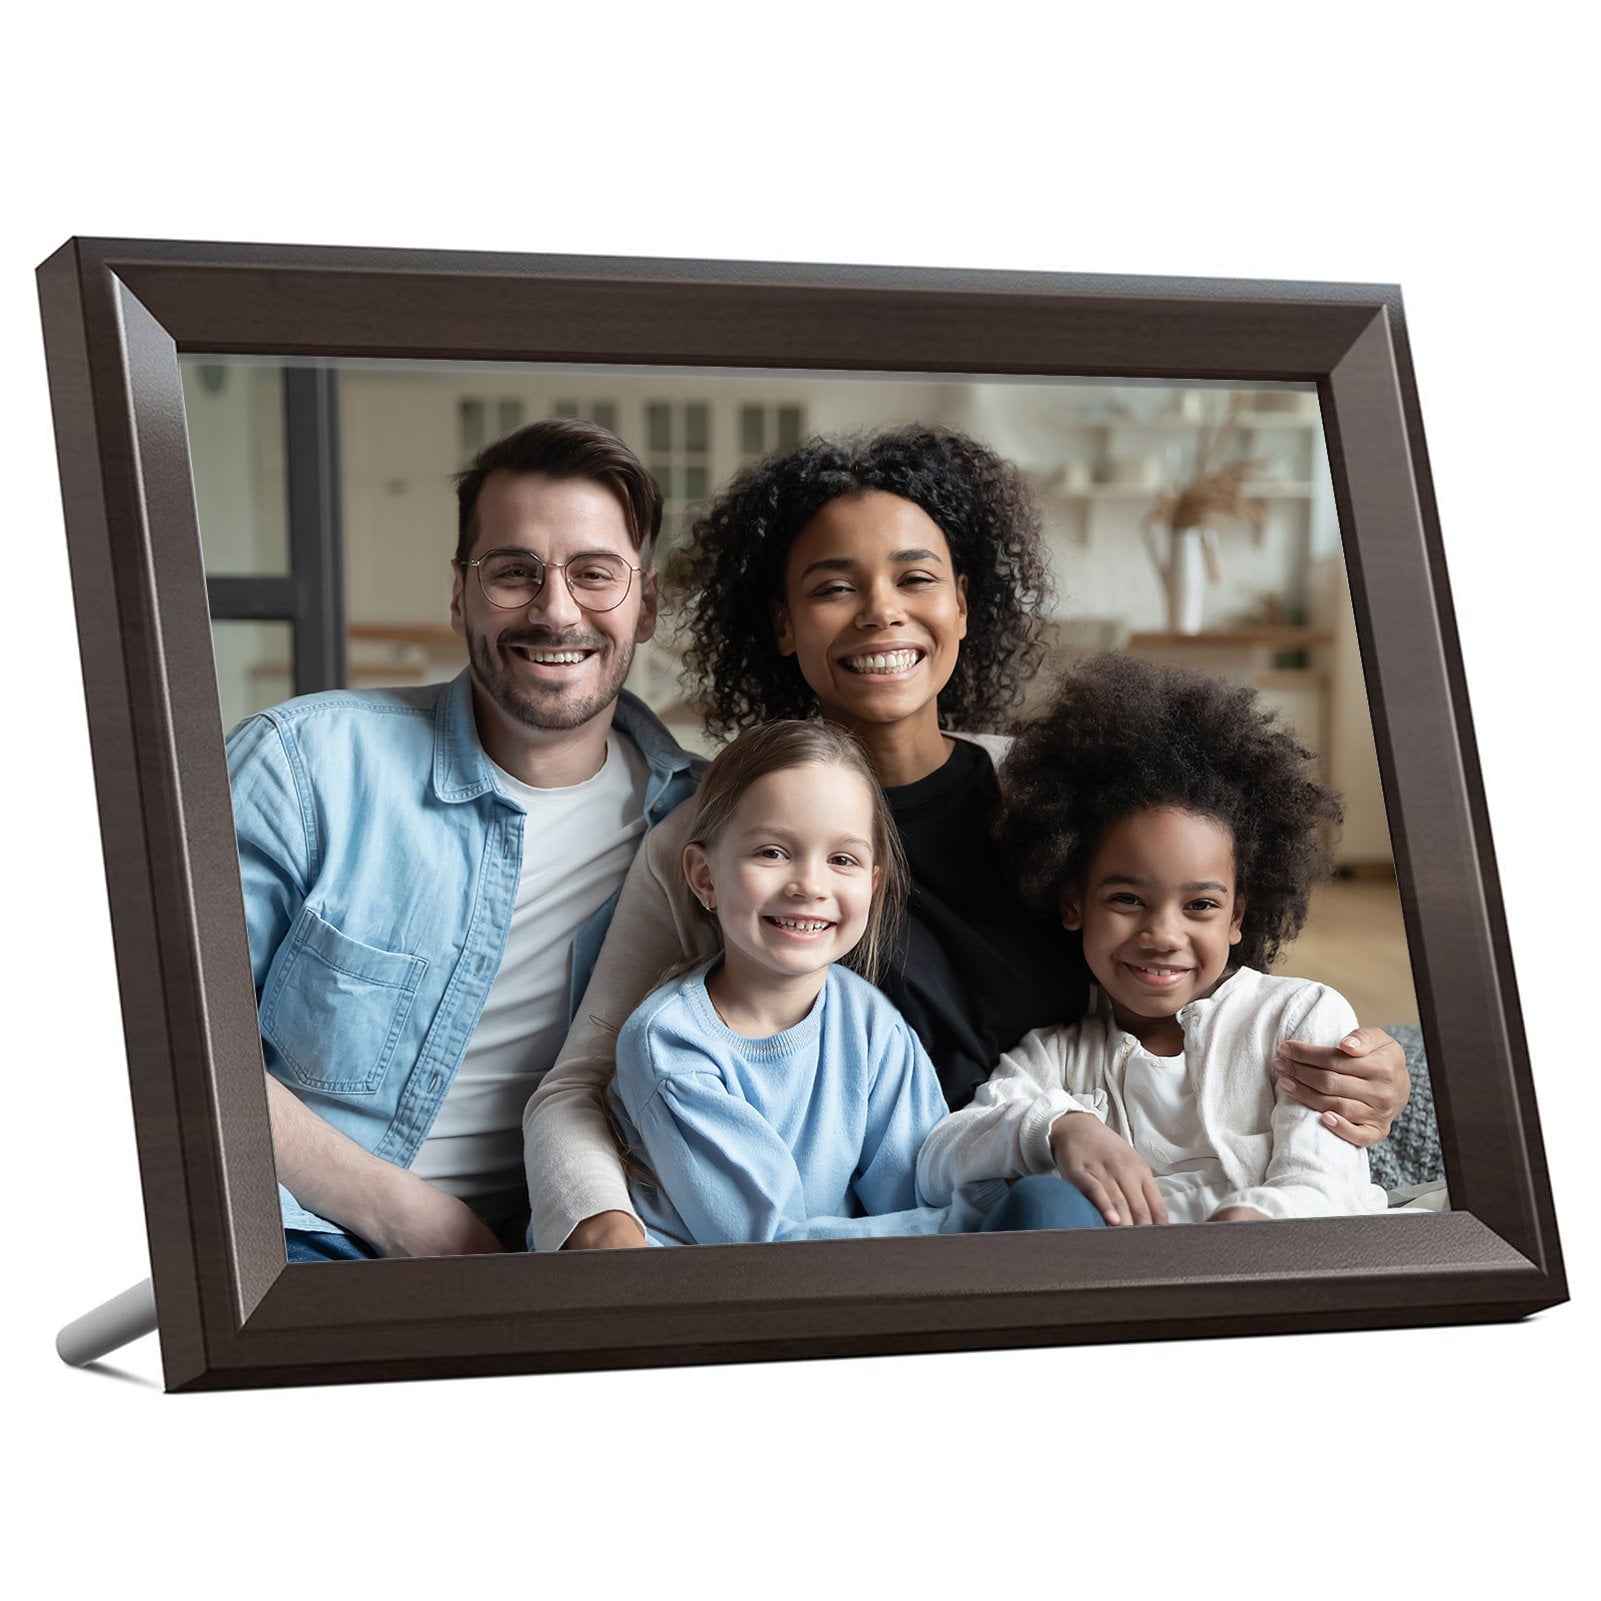 Dragon Touch Digital Picture Frame Wi-Fi 10 inch IPS Touch Screen HD Display,  FHD 1080P Touchscreen, 16GB Storage, Auto-Rotate, Share Photos via App,  Email, Cloud (Brown)